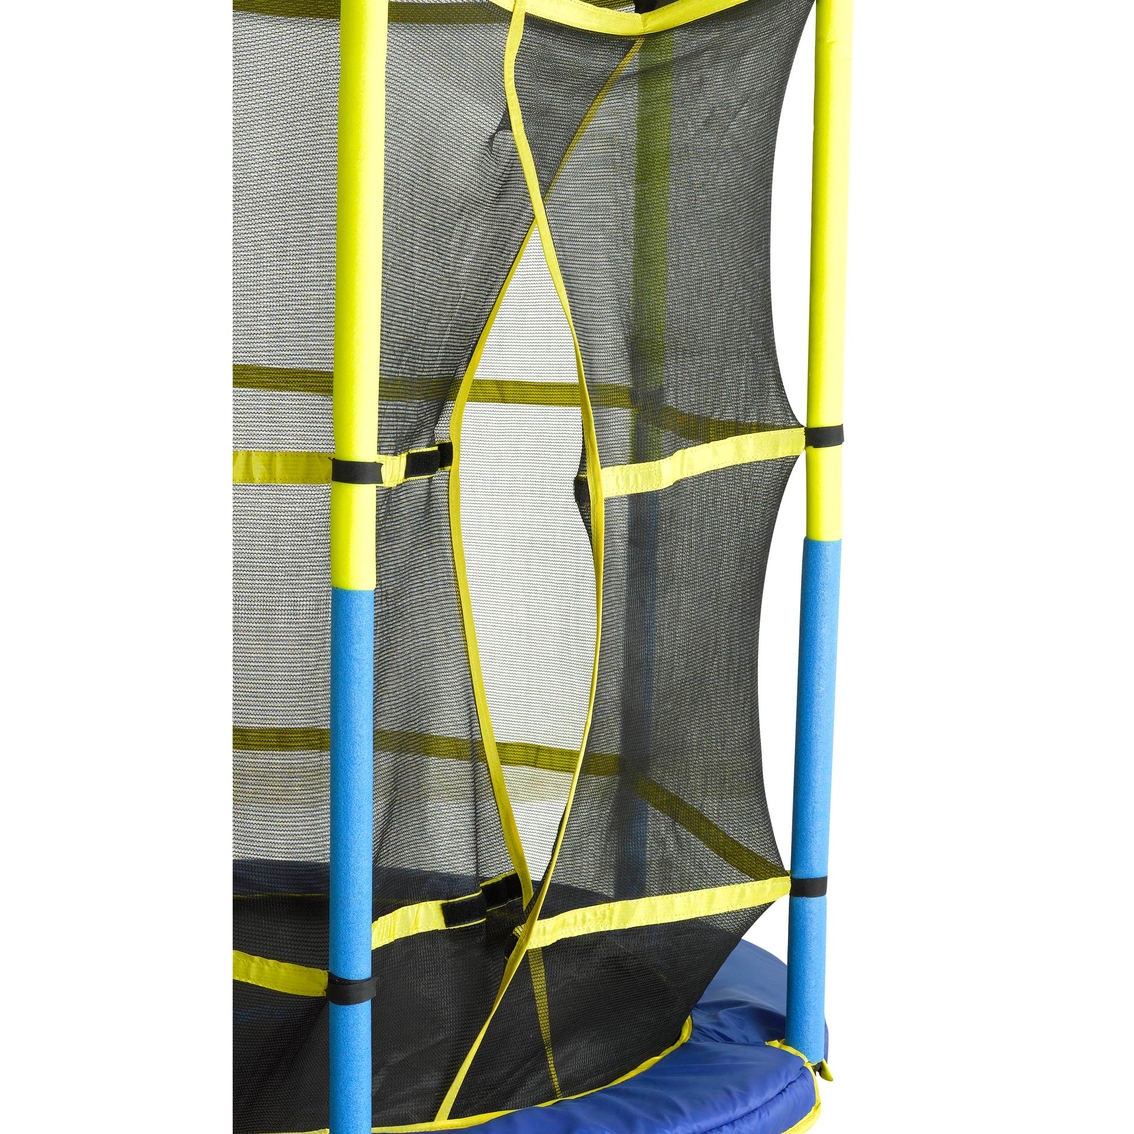 UpperBounce 55 In. Round Trampoline and Enclosure Set with Easy Assemble Feature - Image 3 of 4